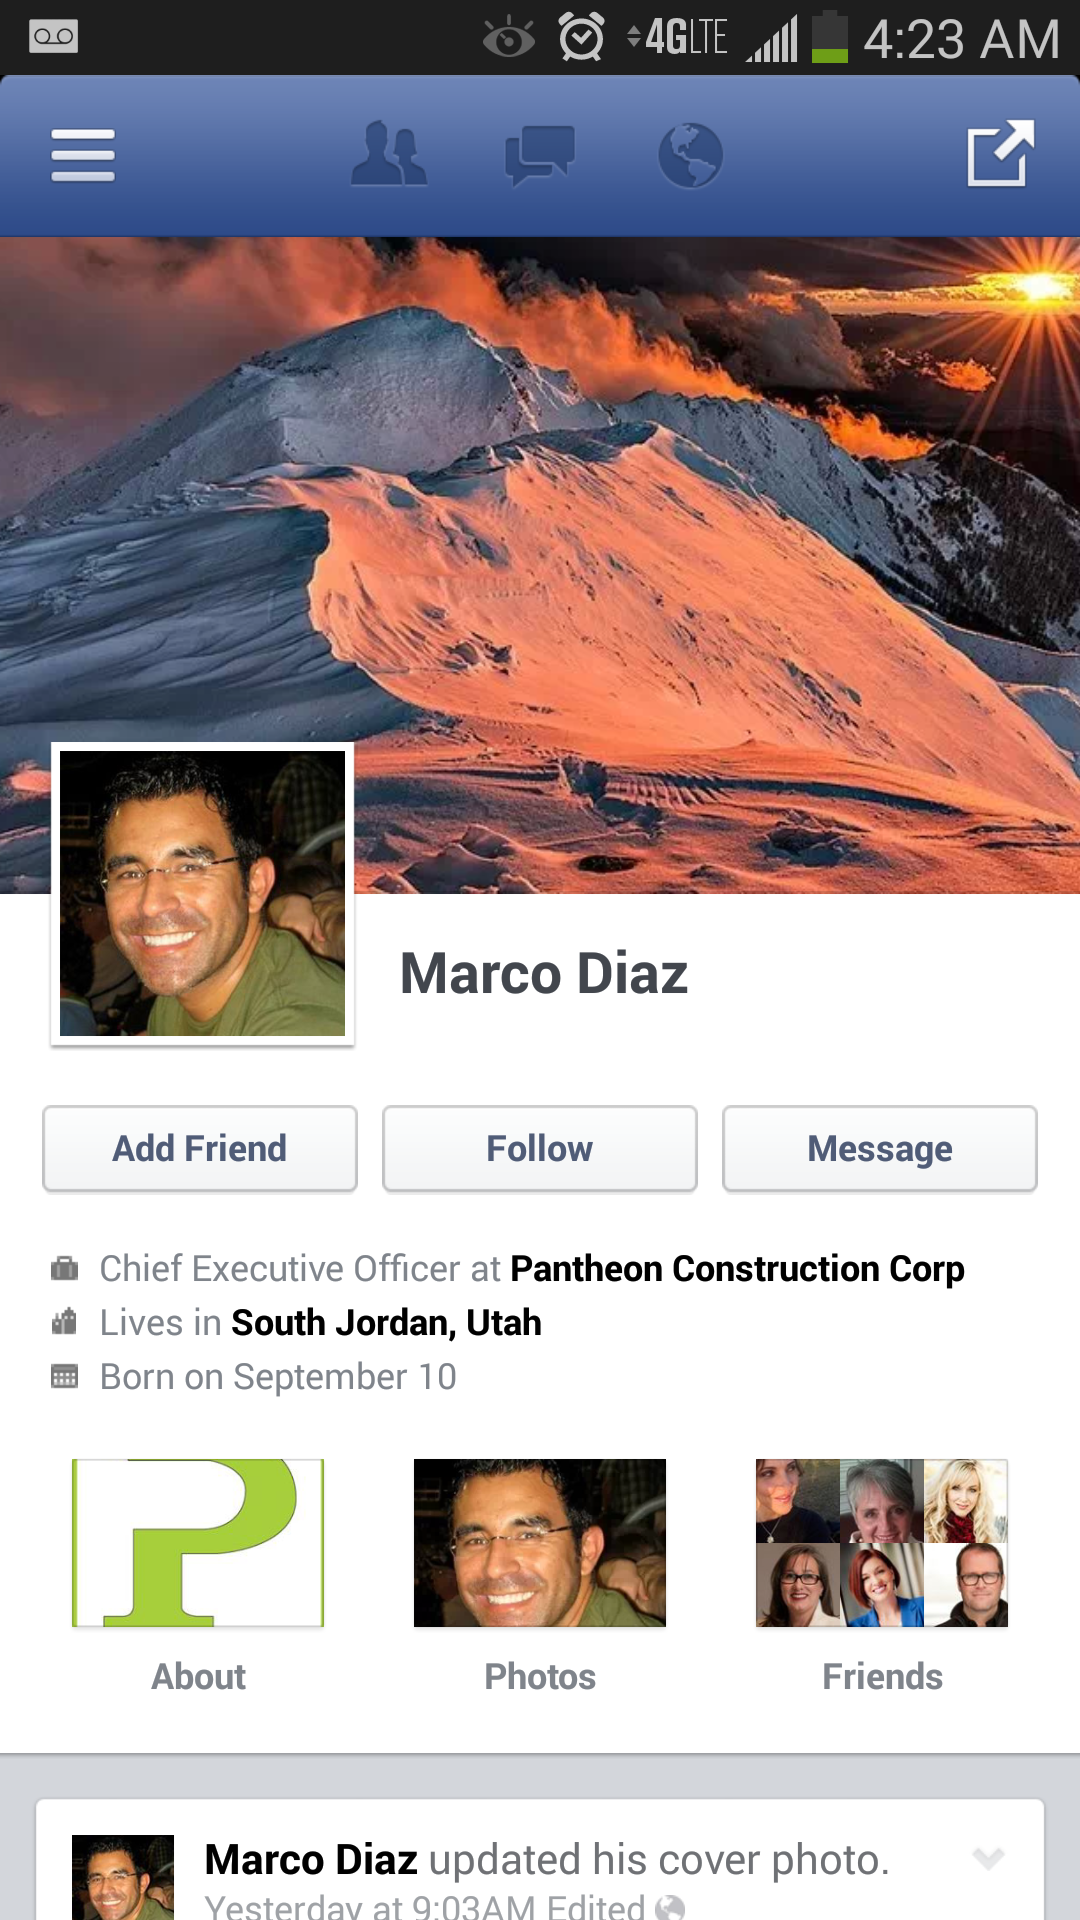 Marcos Diaz profile shows as owner of Pantheon Construction